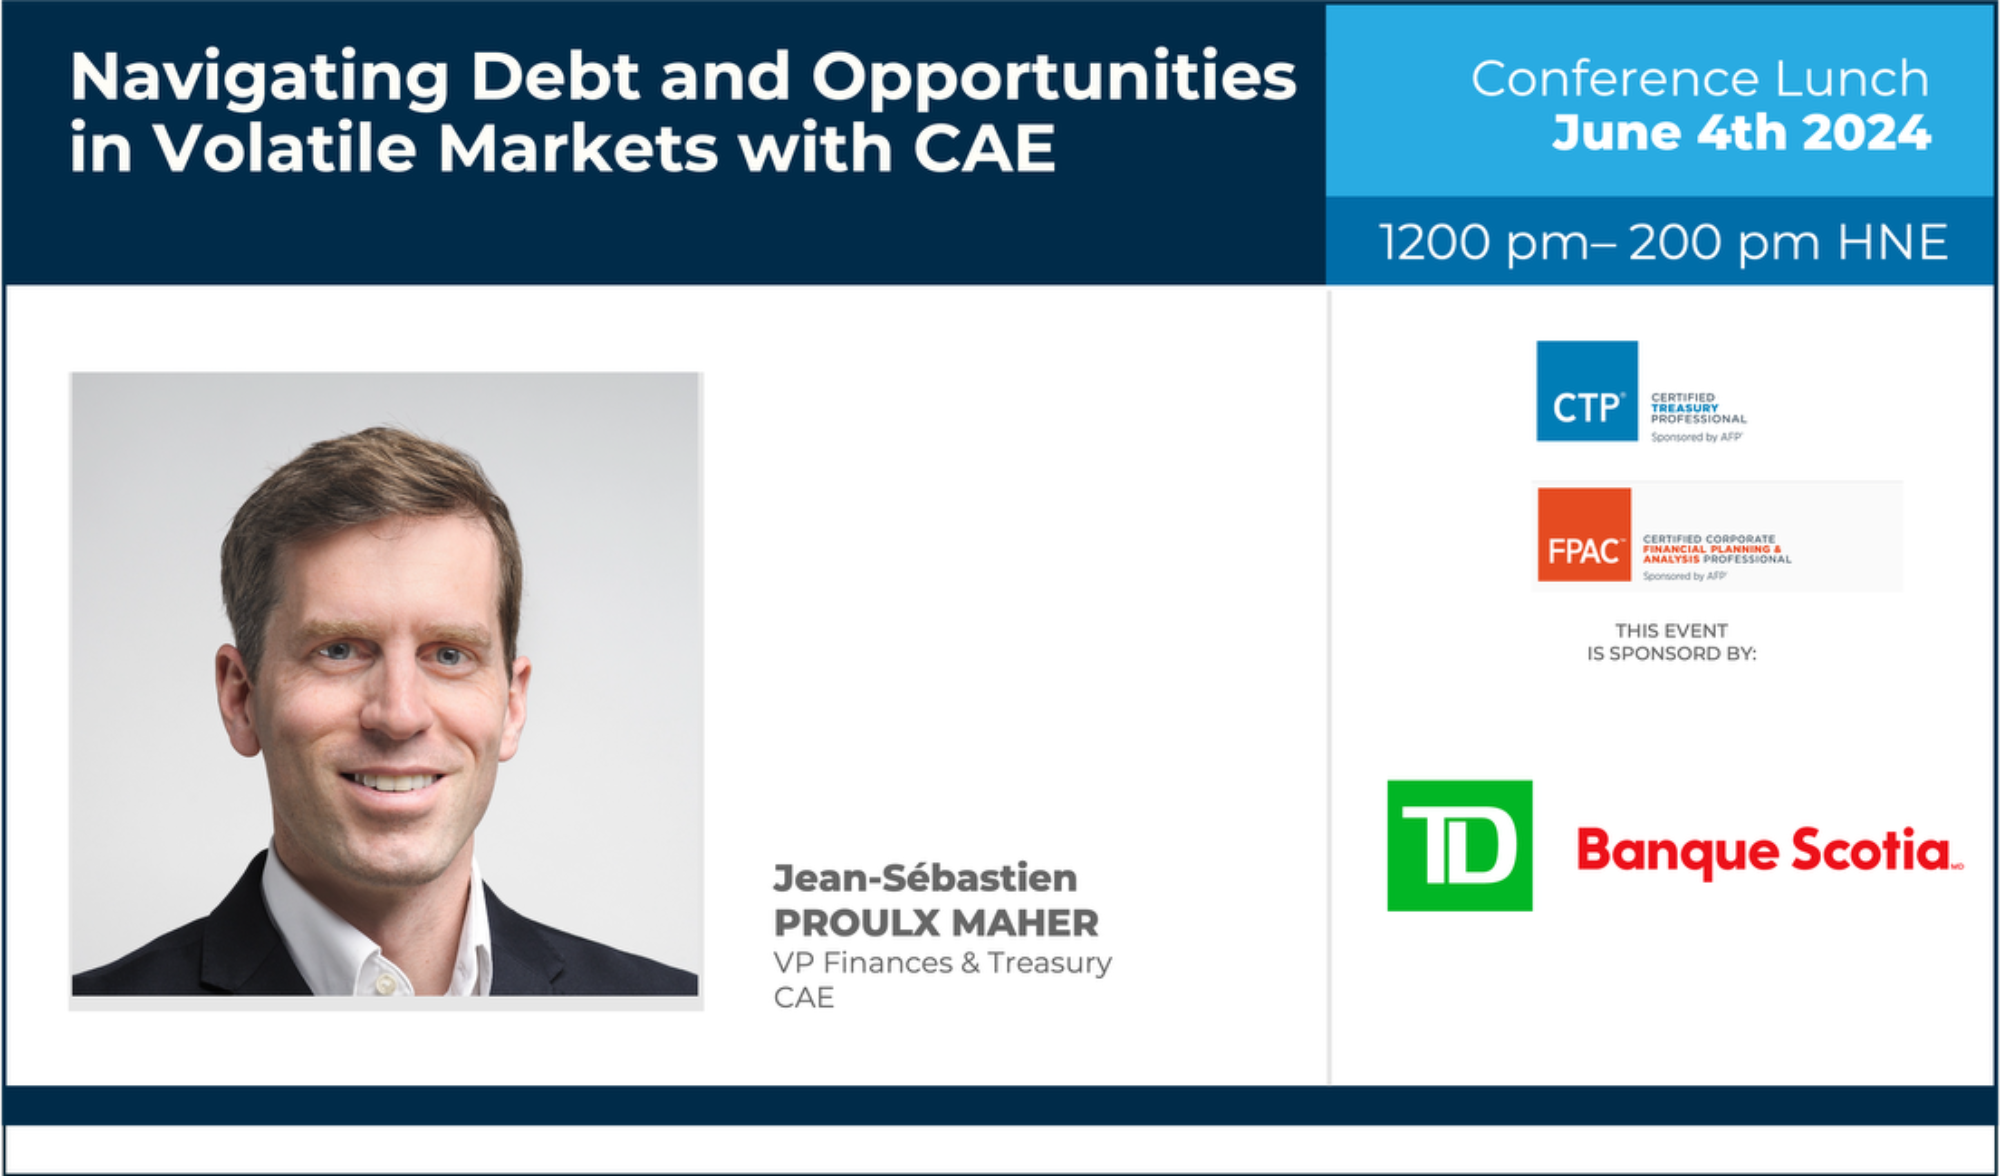 Lunch Conference - Navigating Debt and Opportunities in Volatile Markets with CAE